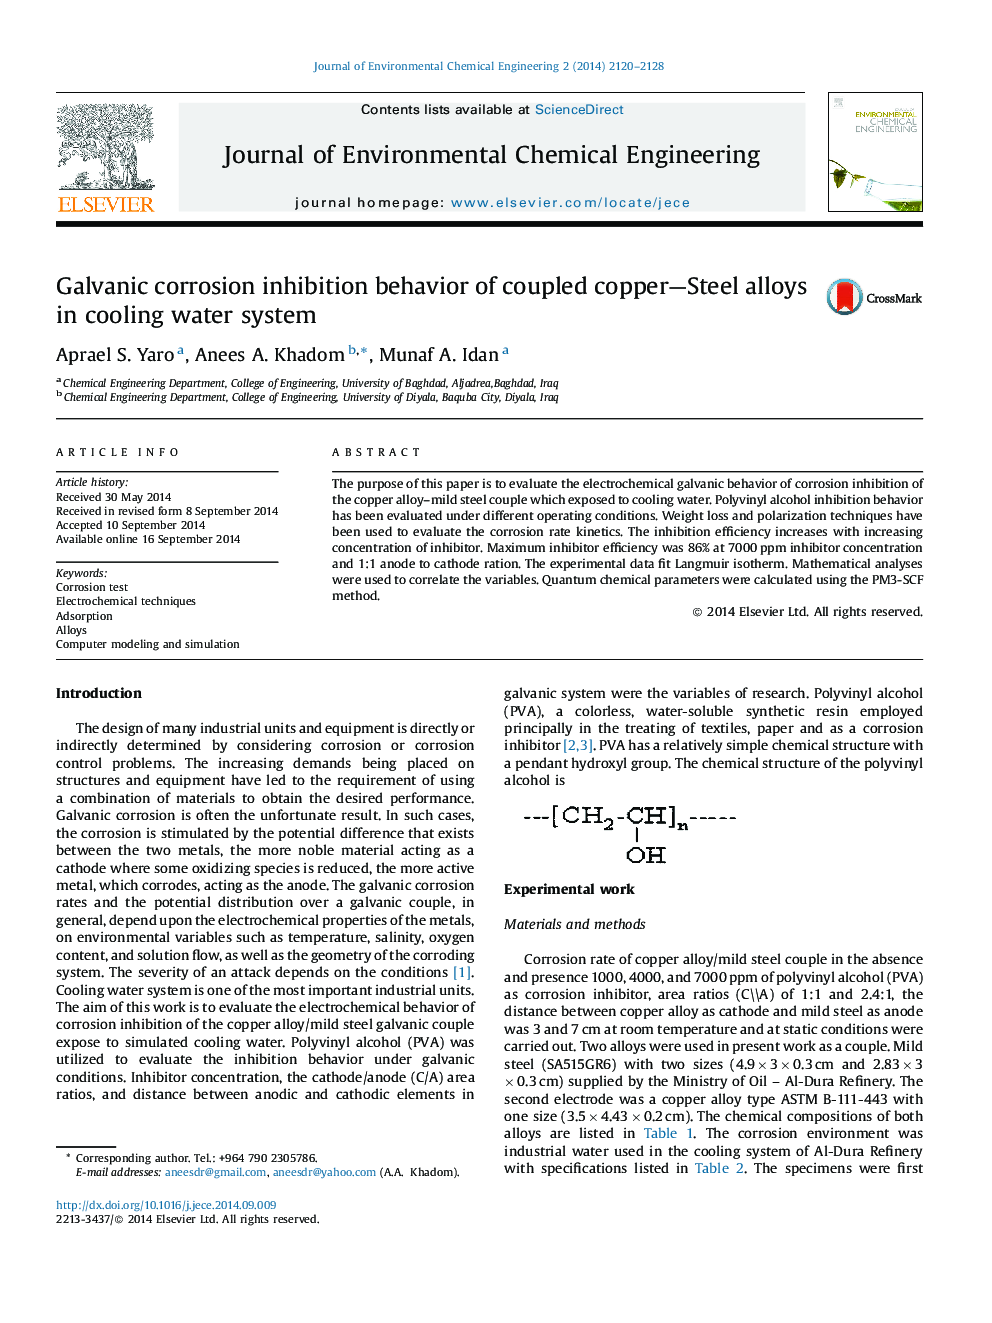 Galvanic corrosion inhibition behavior of coupled copper—Steel alloys in cooling water system